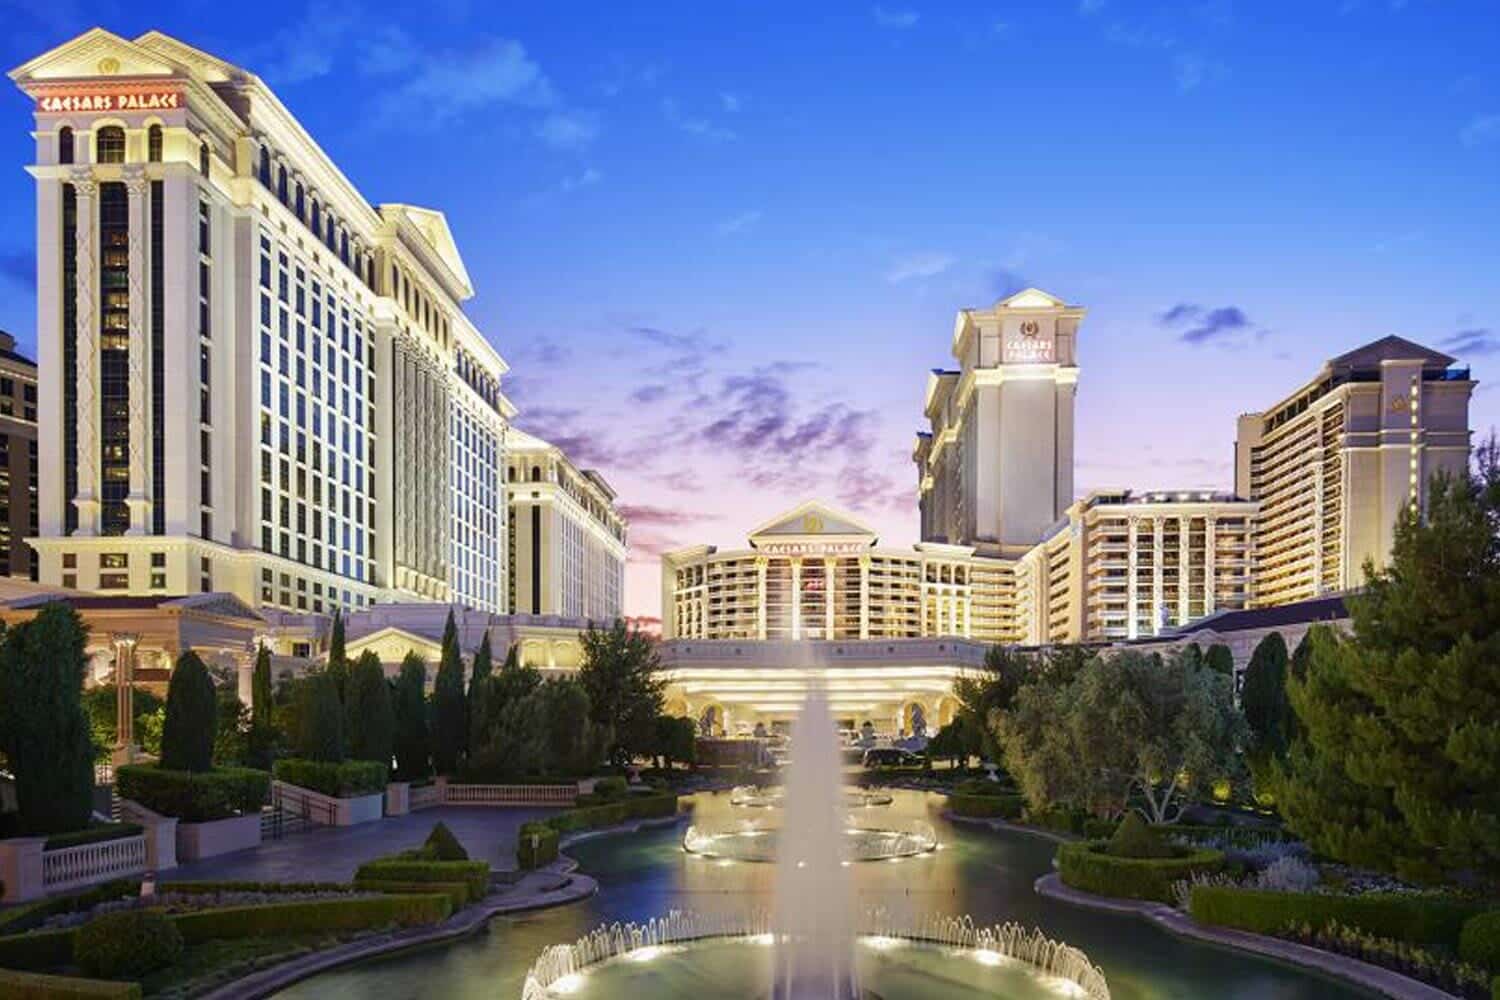 Here's your exclusive look inside Caesars Palace: the Las Vegas